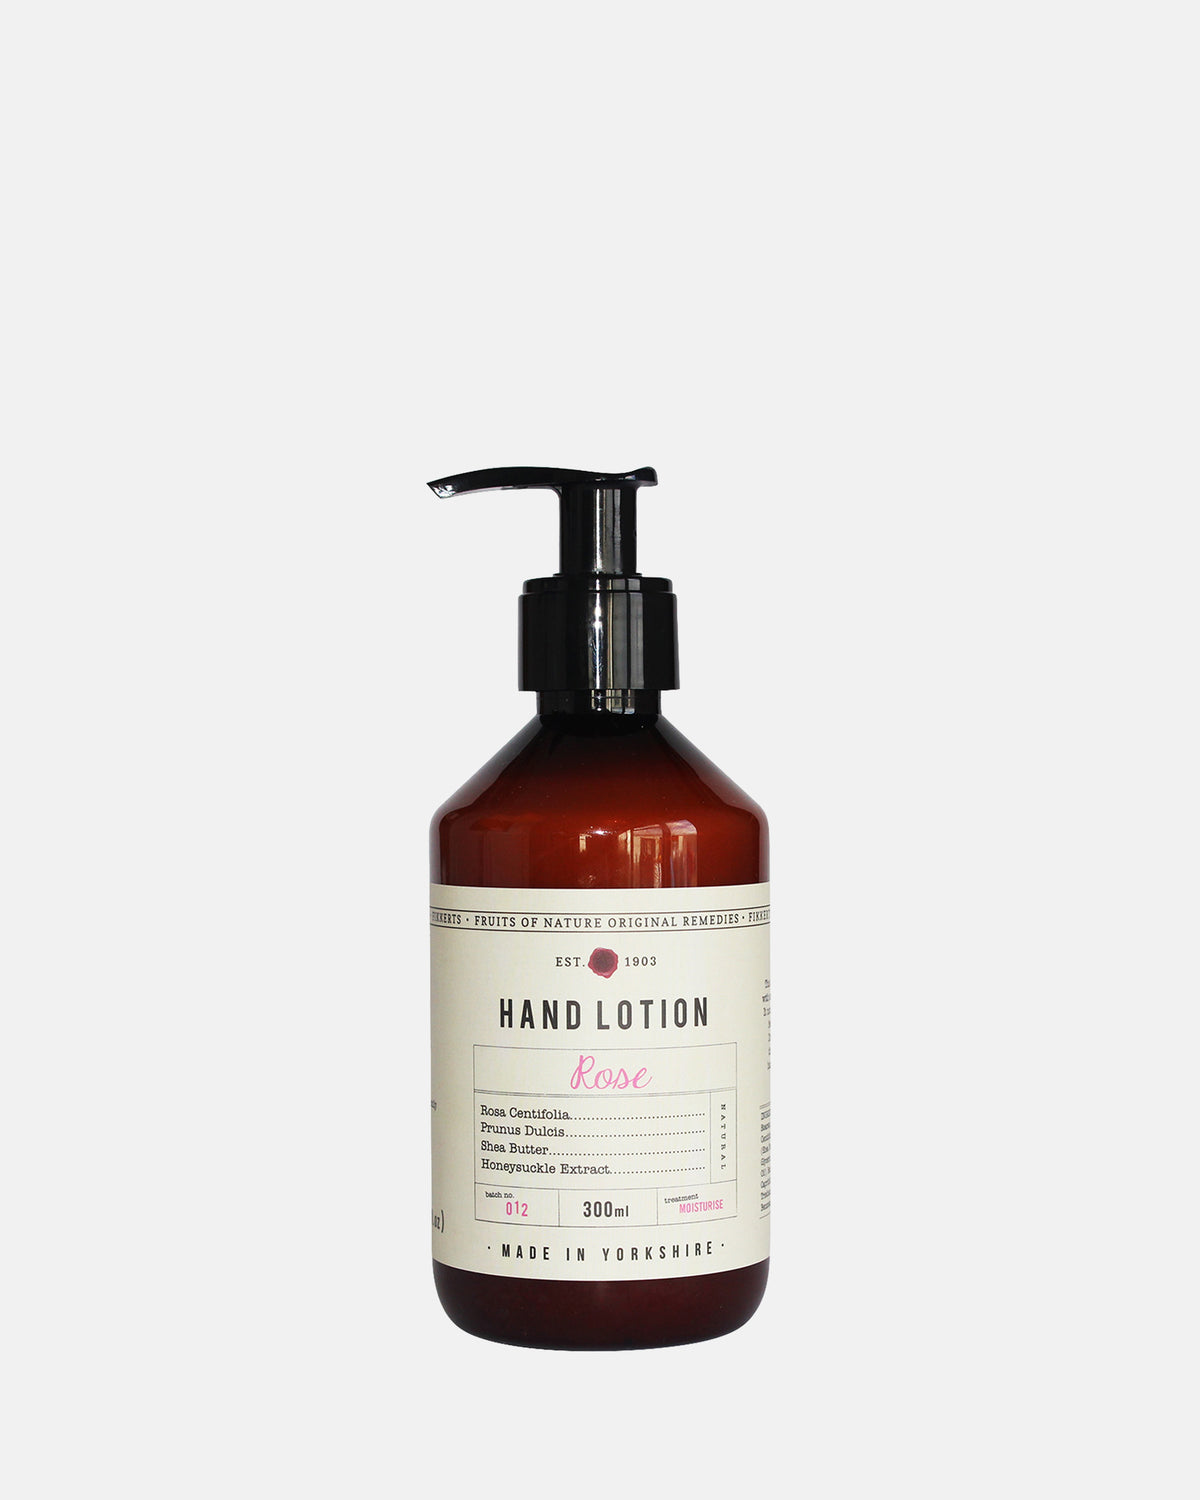 Rose Hand Lotion